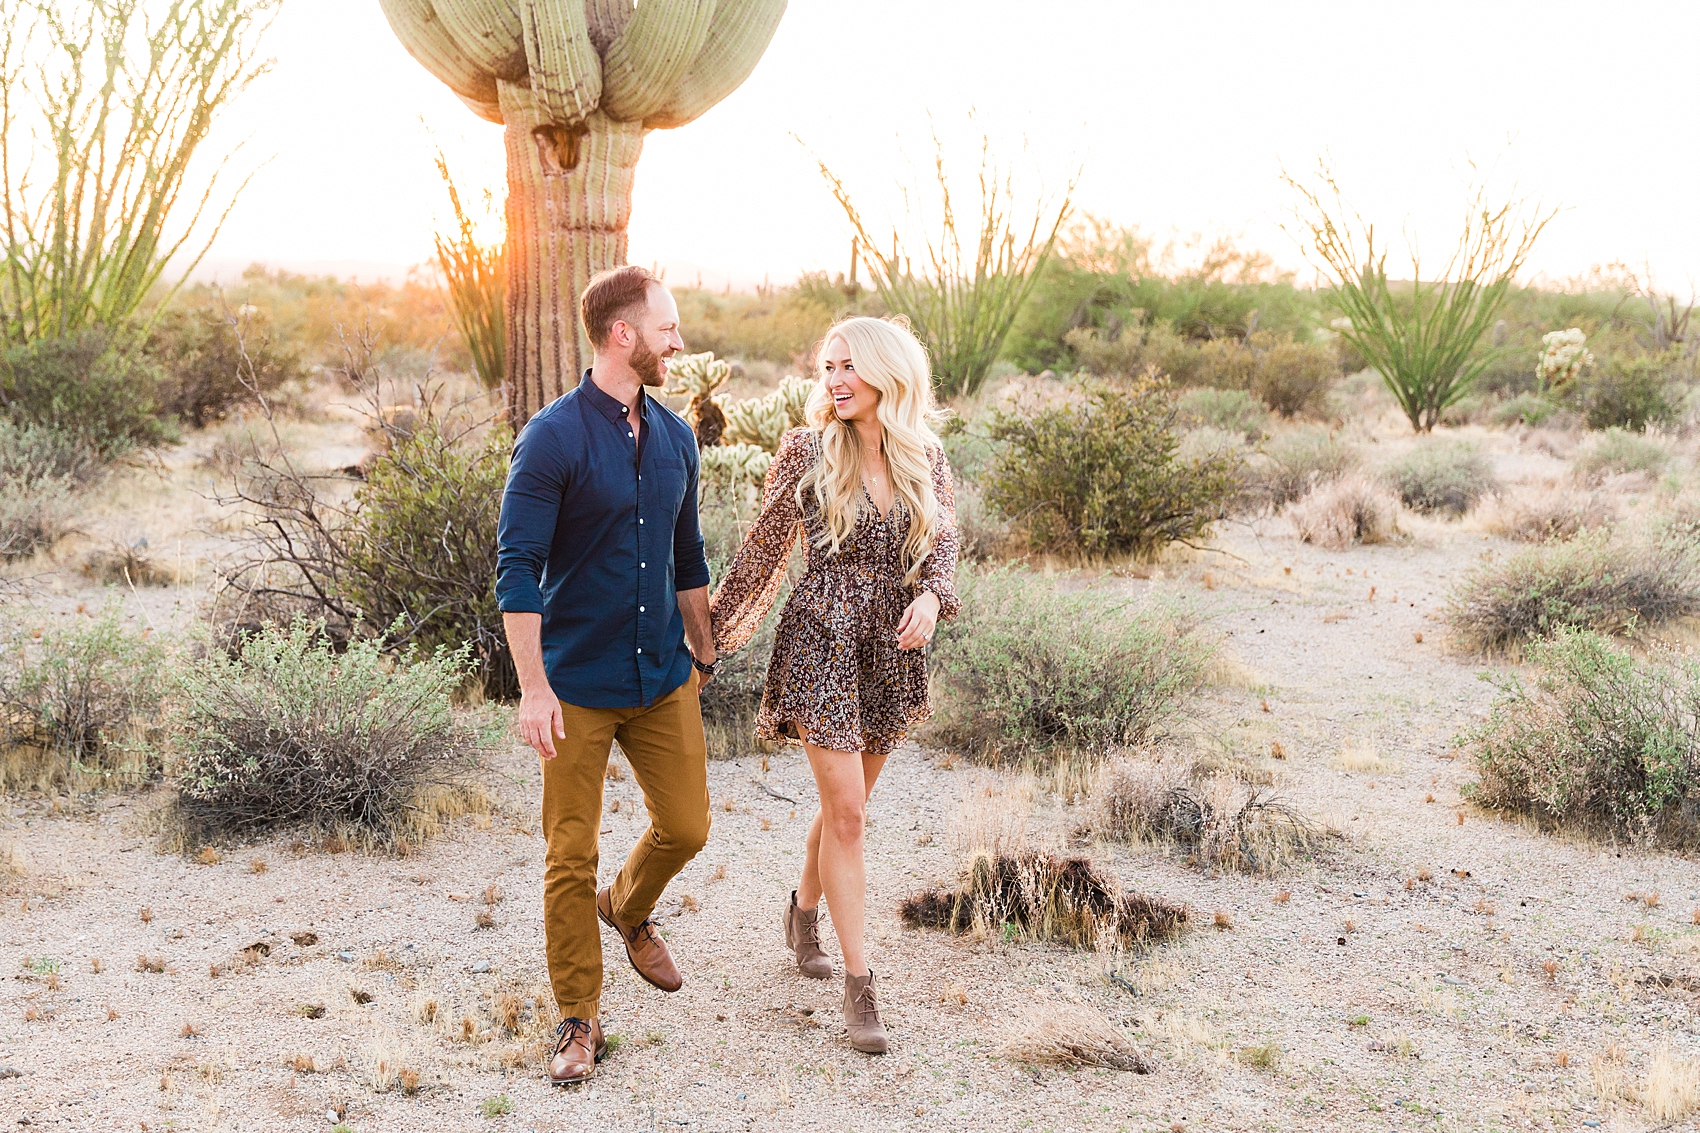 Leah Hope Photography | Scottsdale Phoenix Arizona | Desert Landscape Cactus Scenery | Family Pictures | What to Wear | Family Poses | Lifestyle